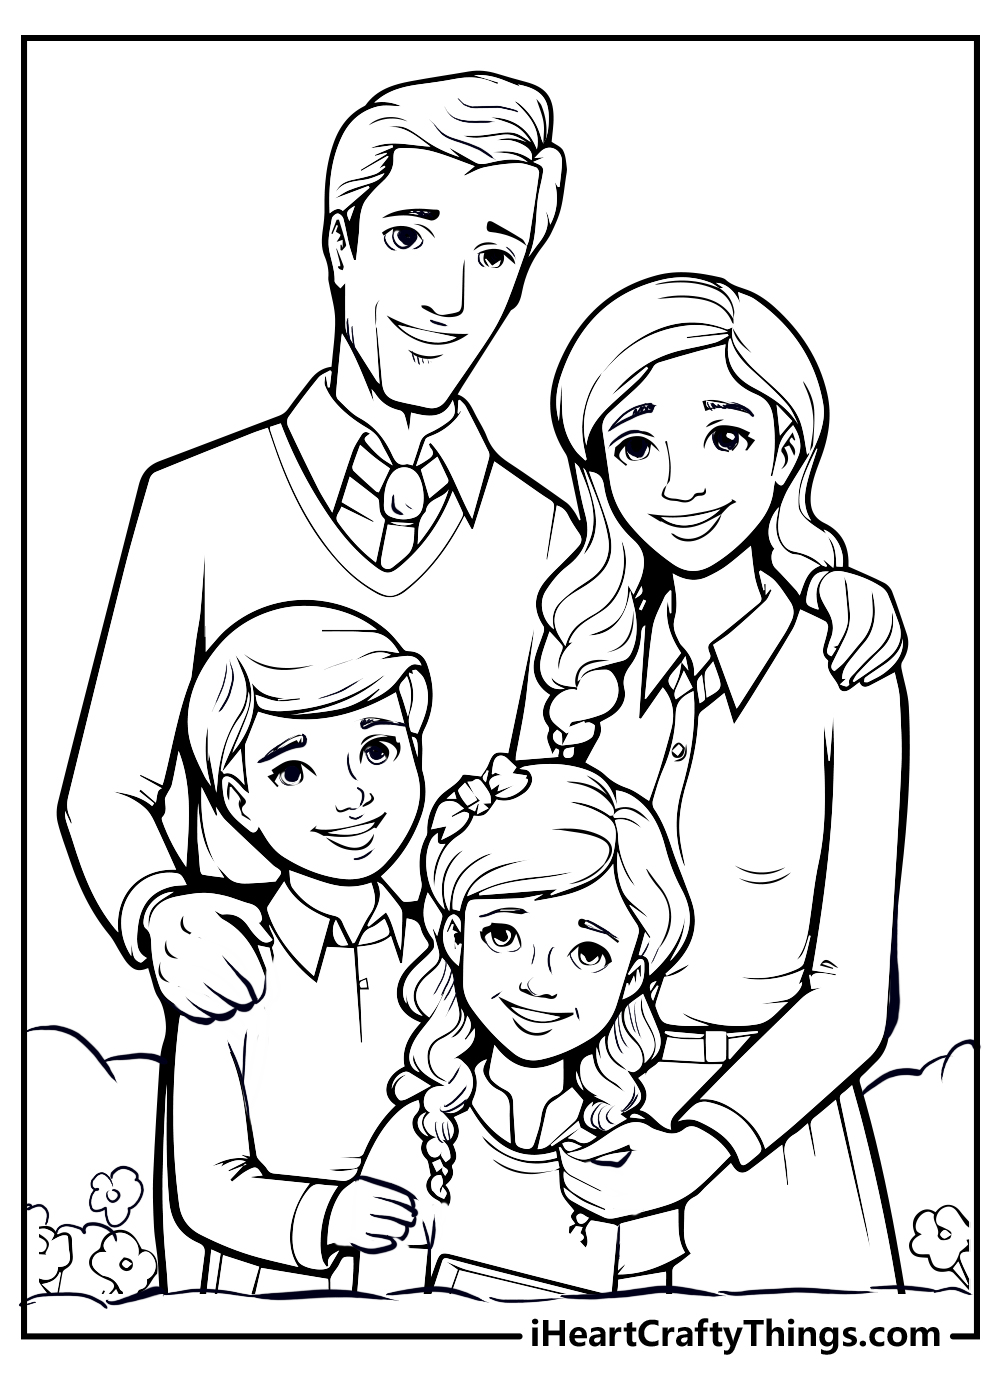 Printable family coloring pages updated